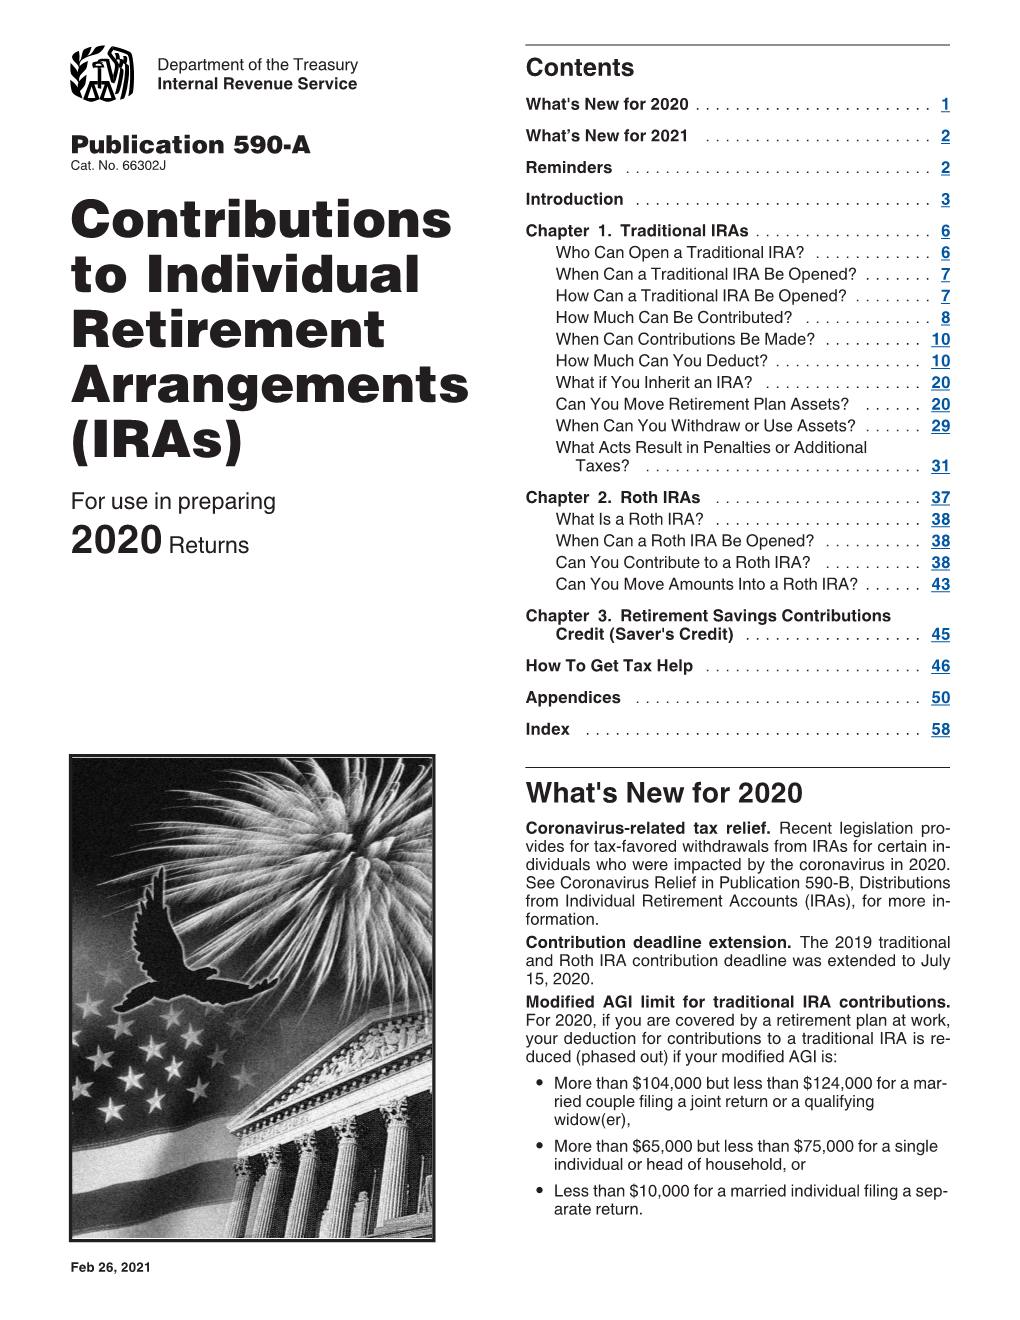 Publications 590-A, Contributions to Individual Retirement Accounts